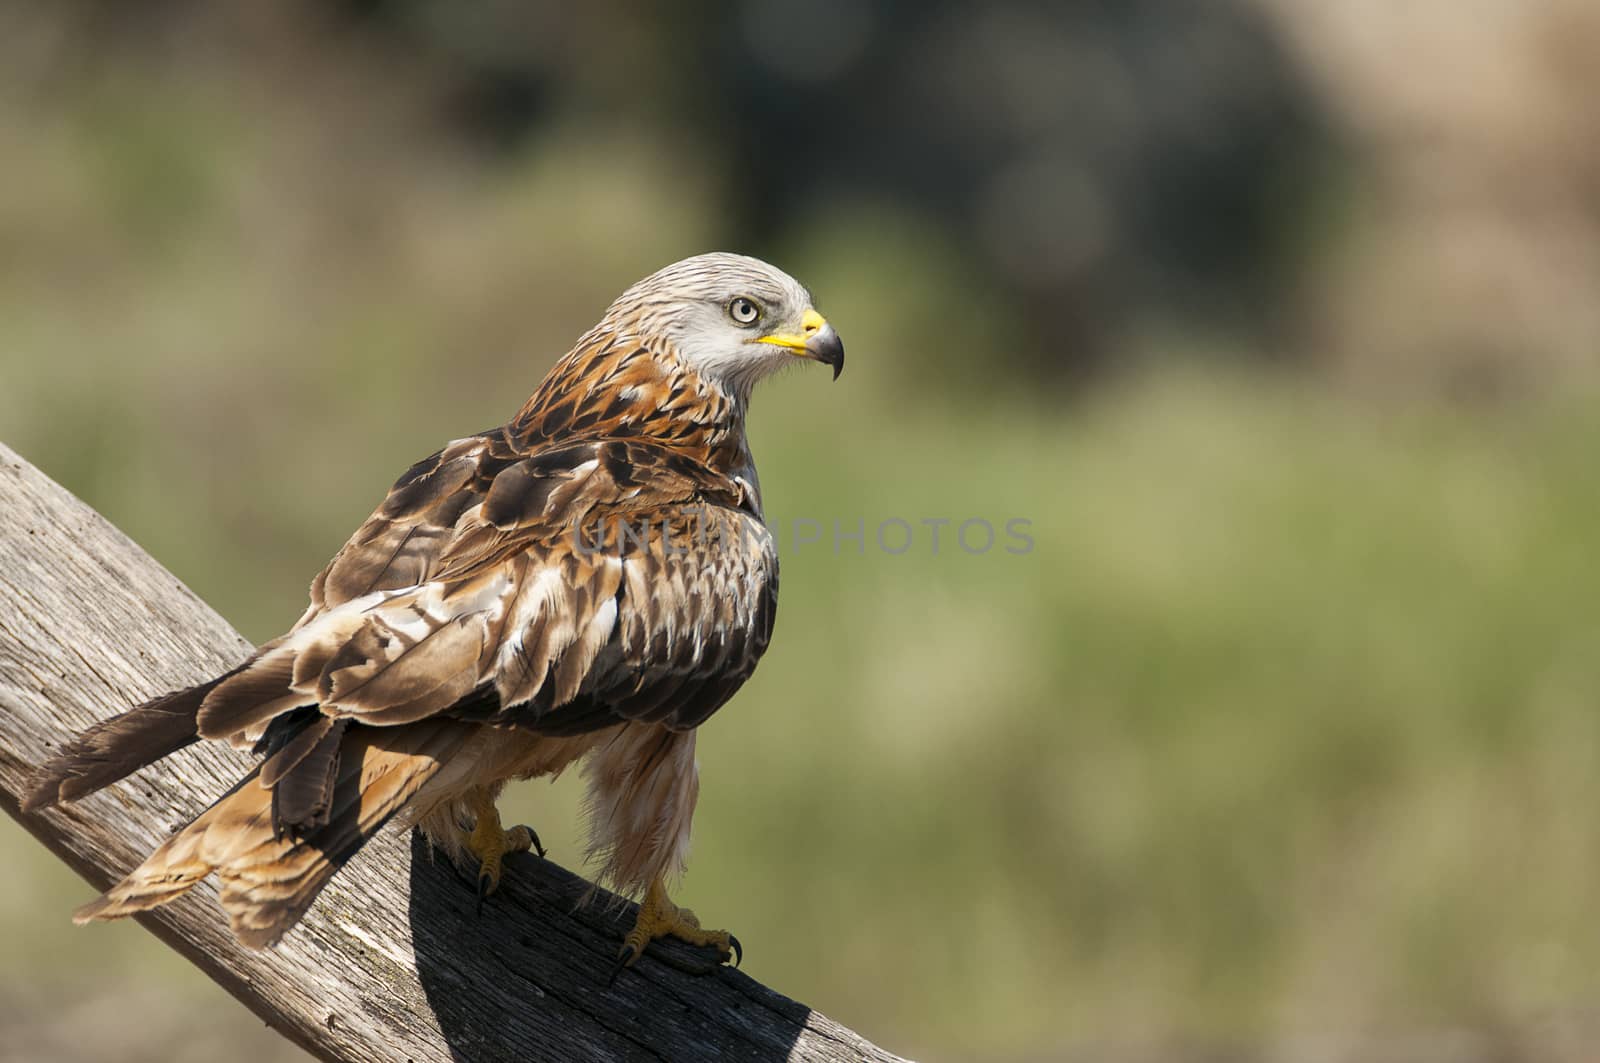 Red kite, Milvus milvus, perched on a branch by jalonsohu@gmail.com